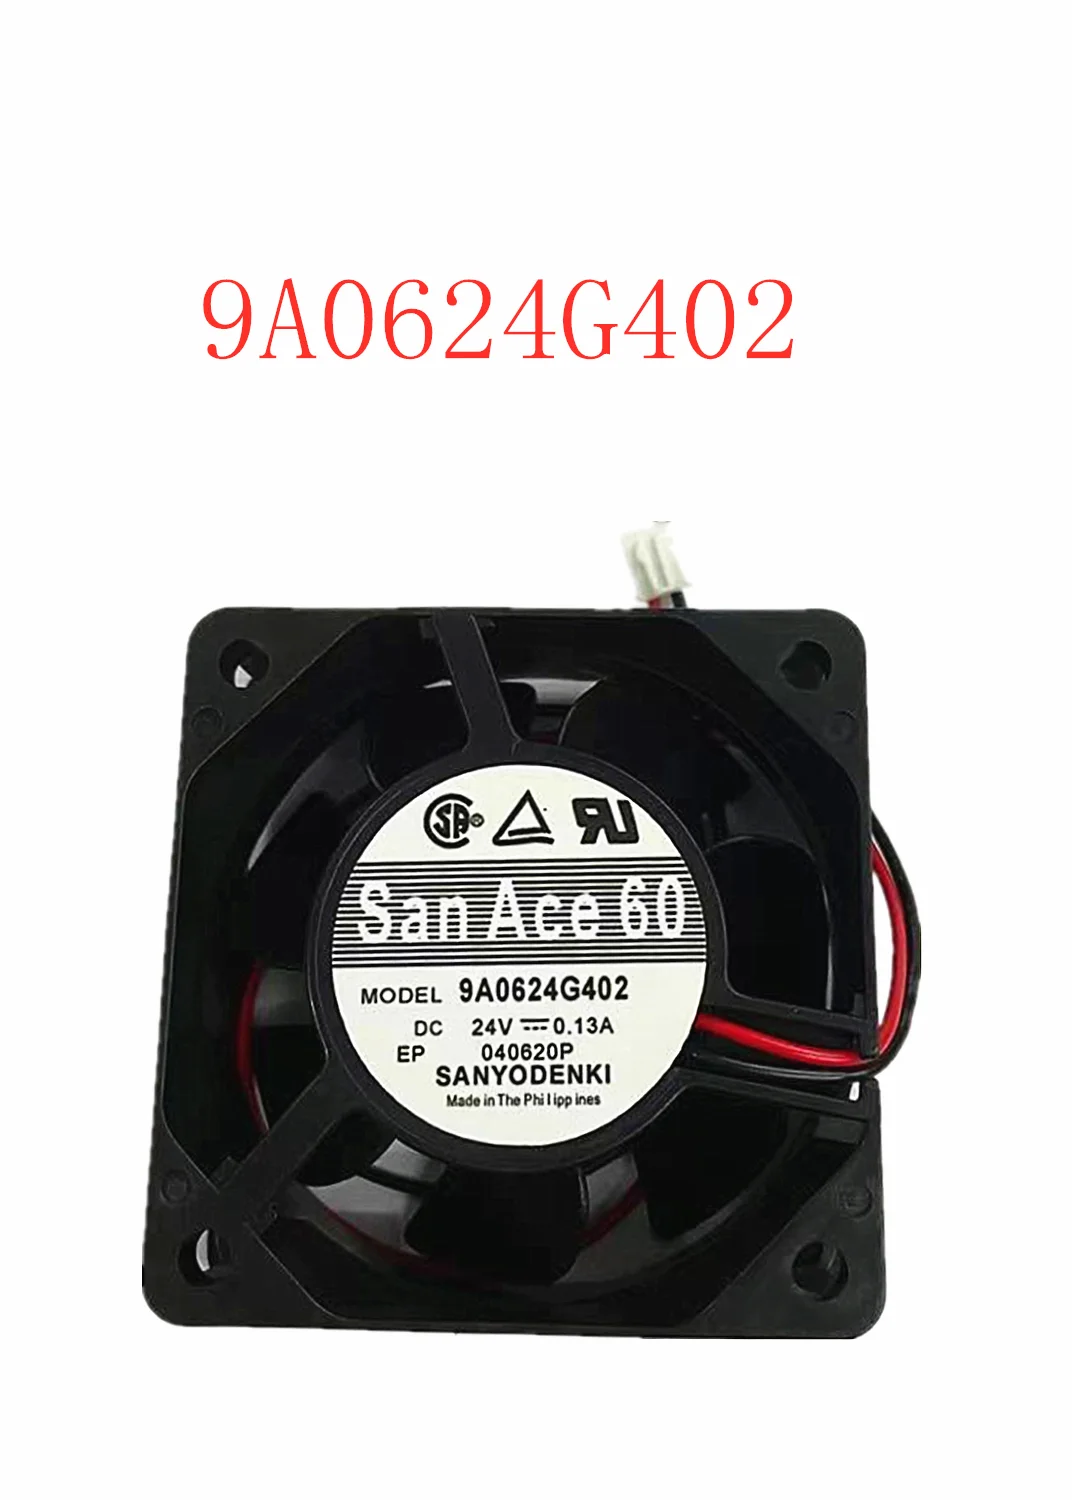 

For Sanyo Denki 9A0624G402 Server Cooling Fan DC 24V 0.13A 60x60x25mm 2-wire